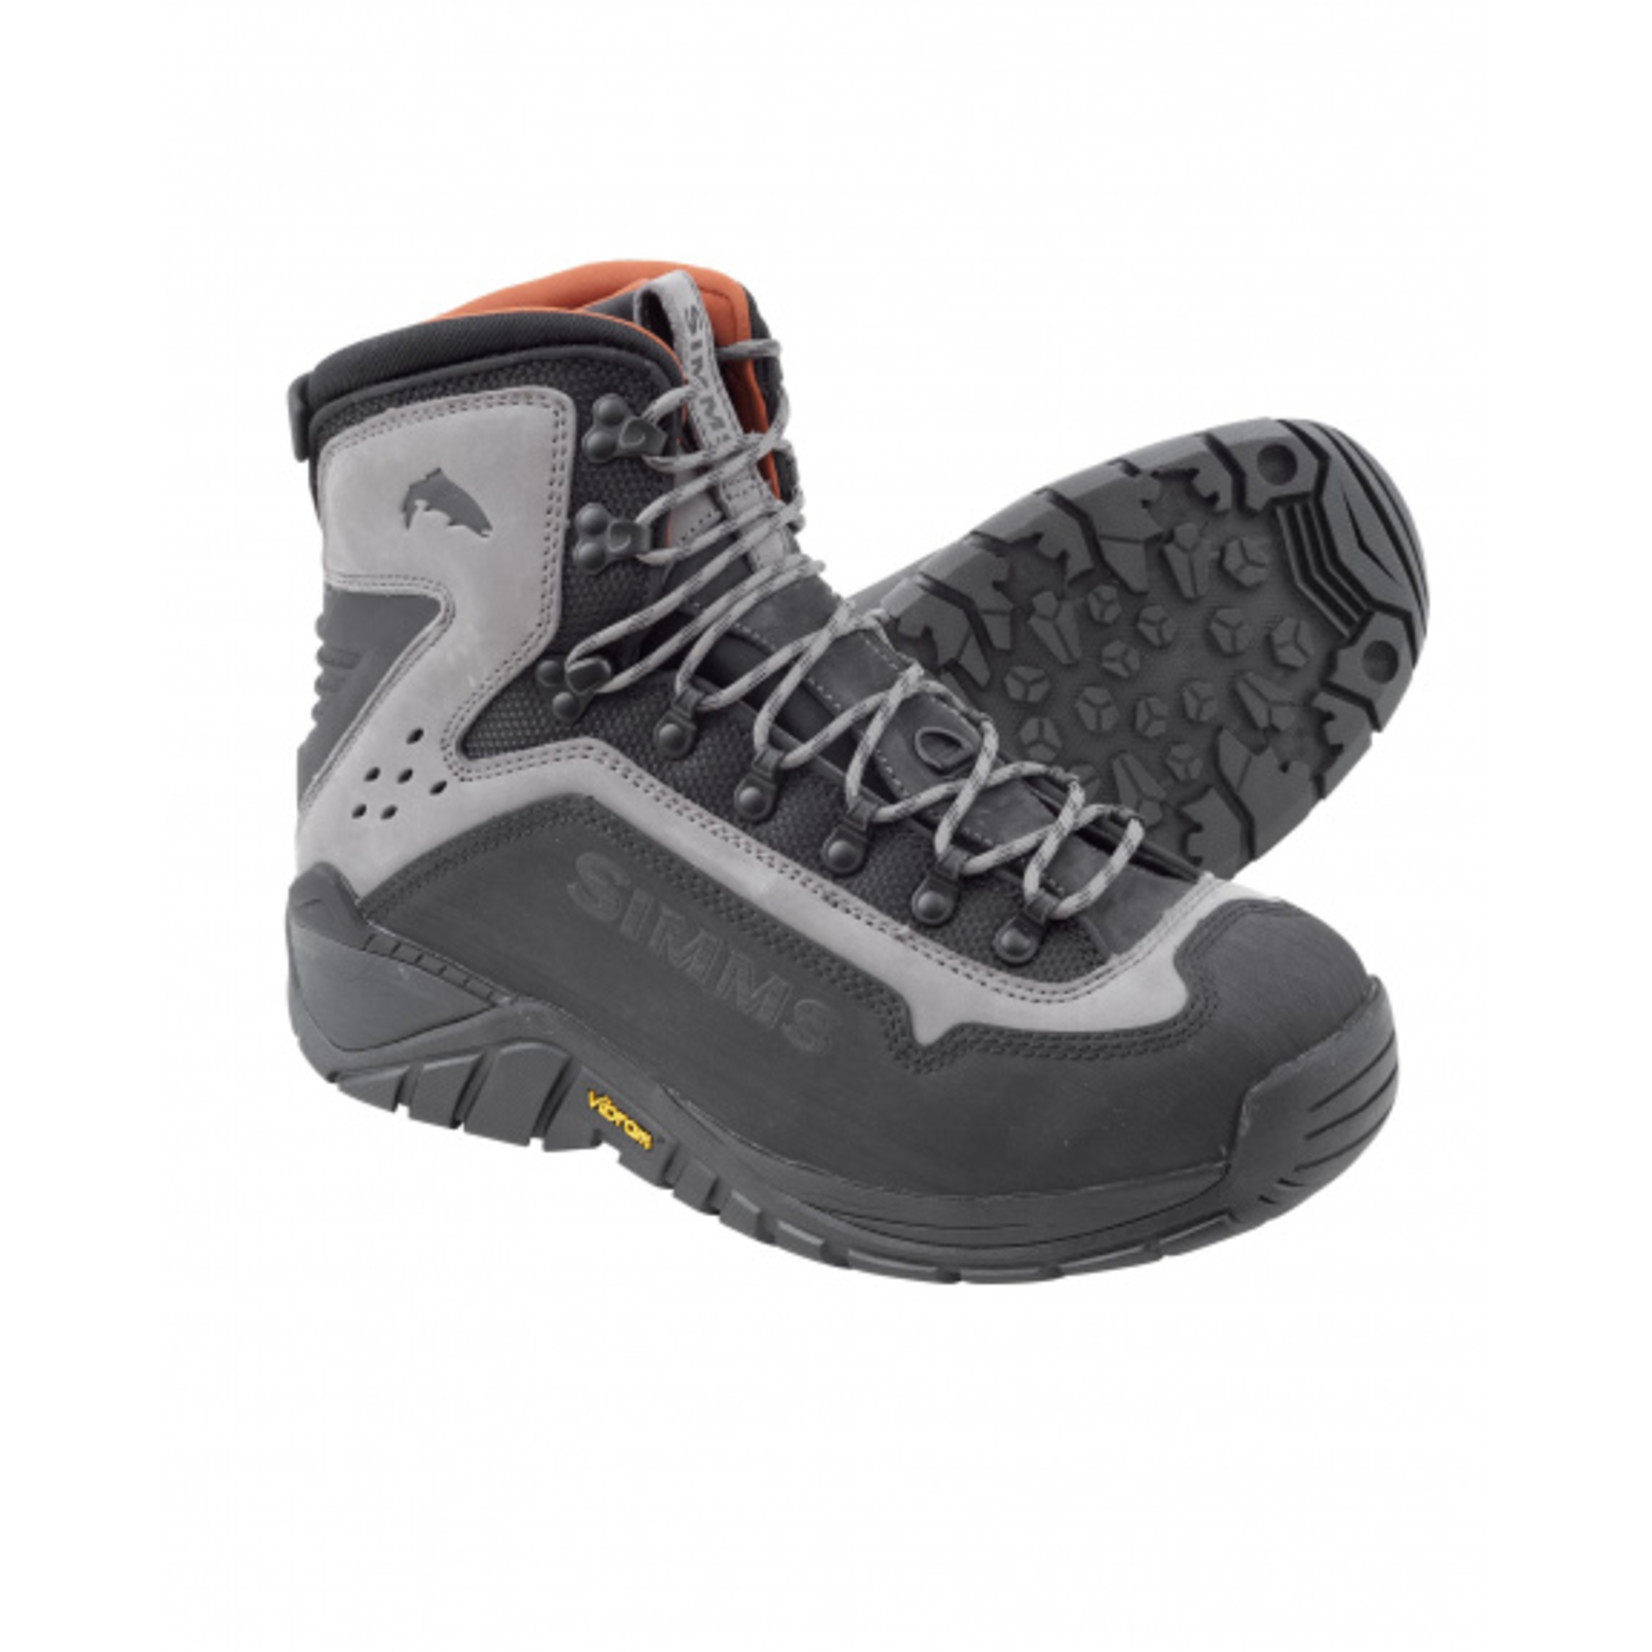 Simms G3 Guide Wading Boots - Vibram Soles